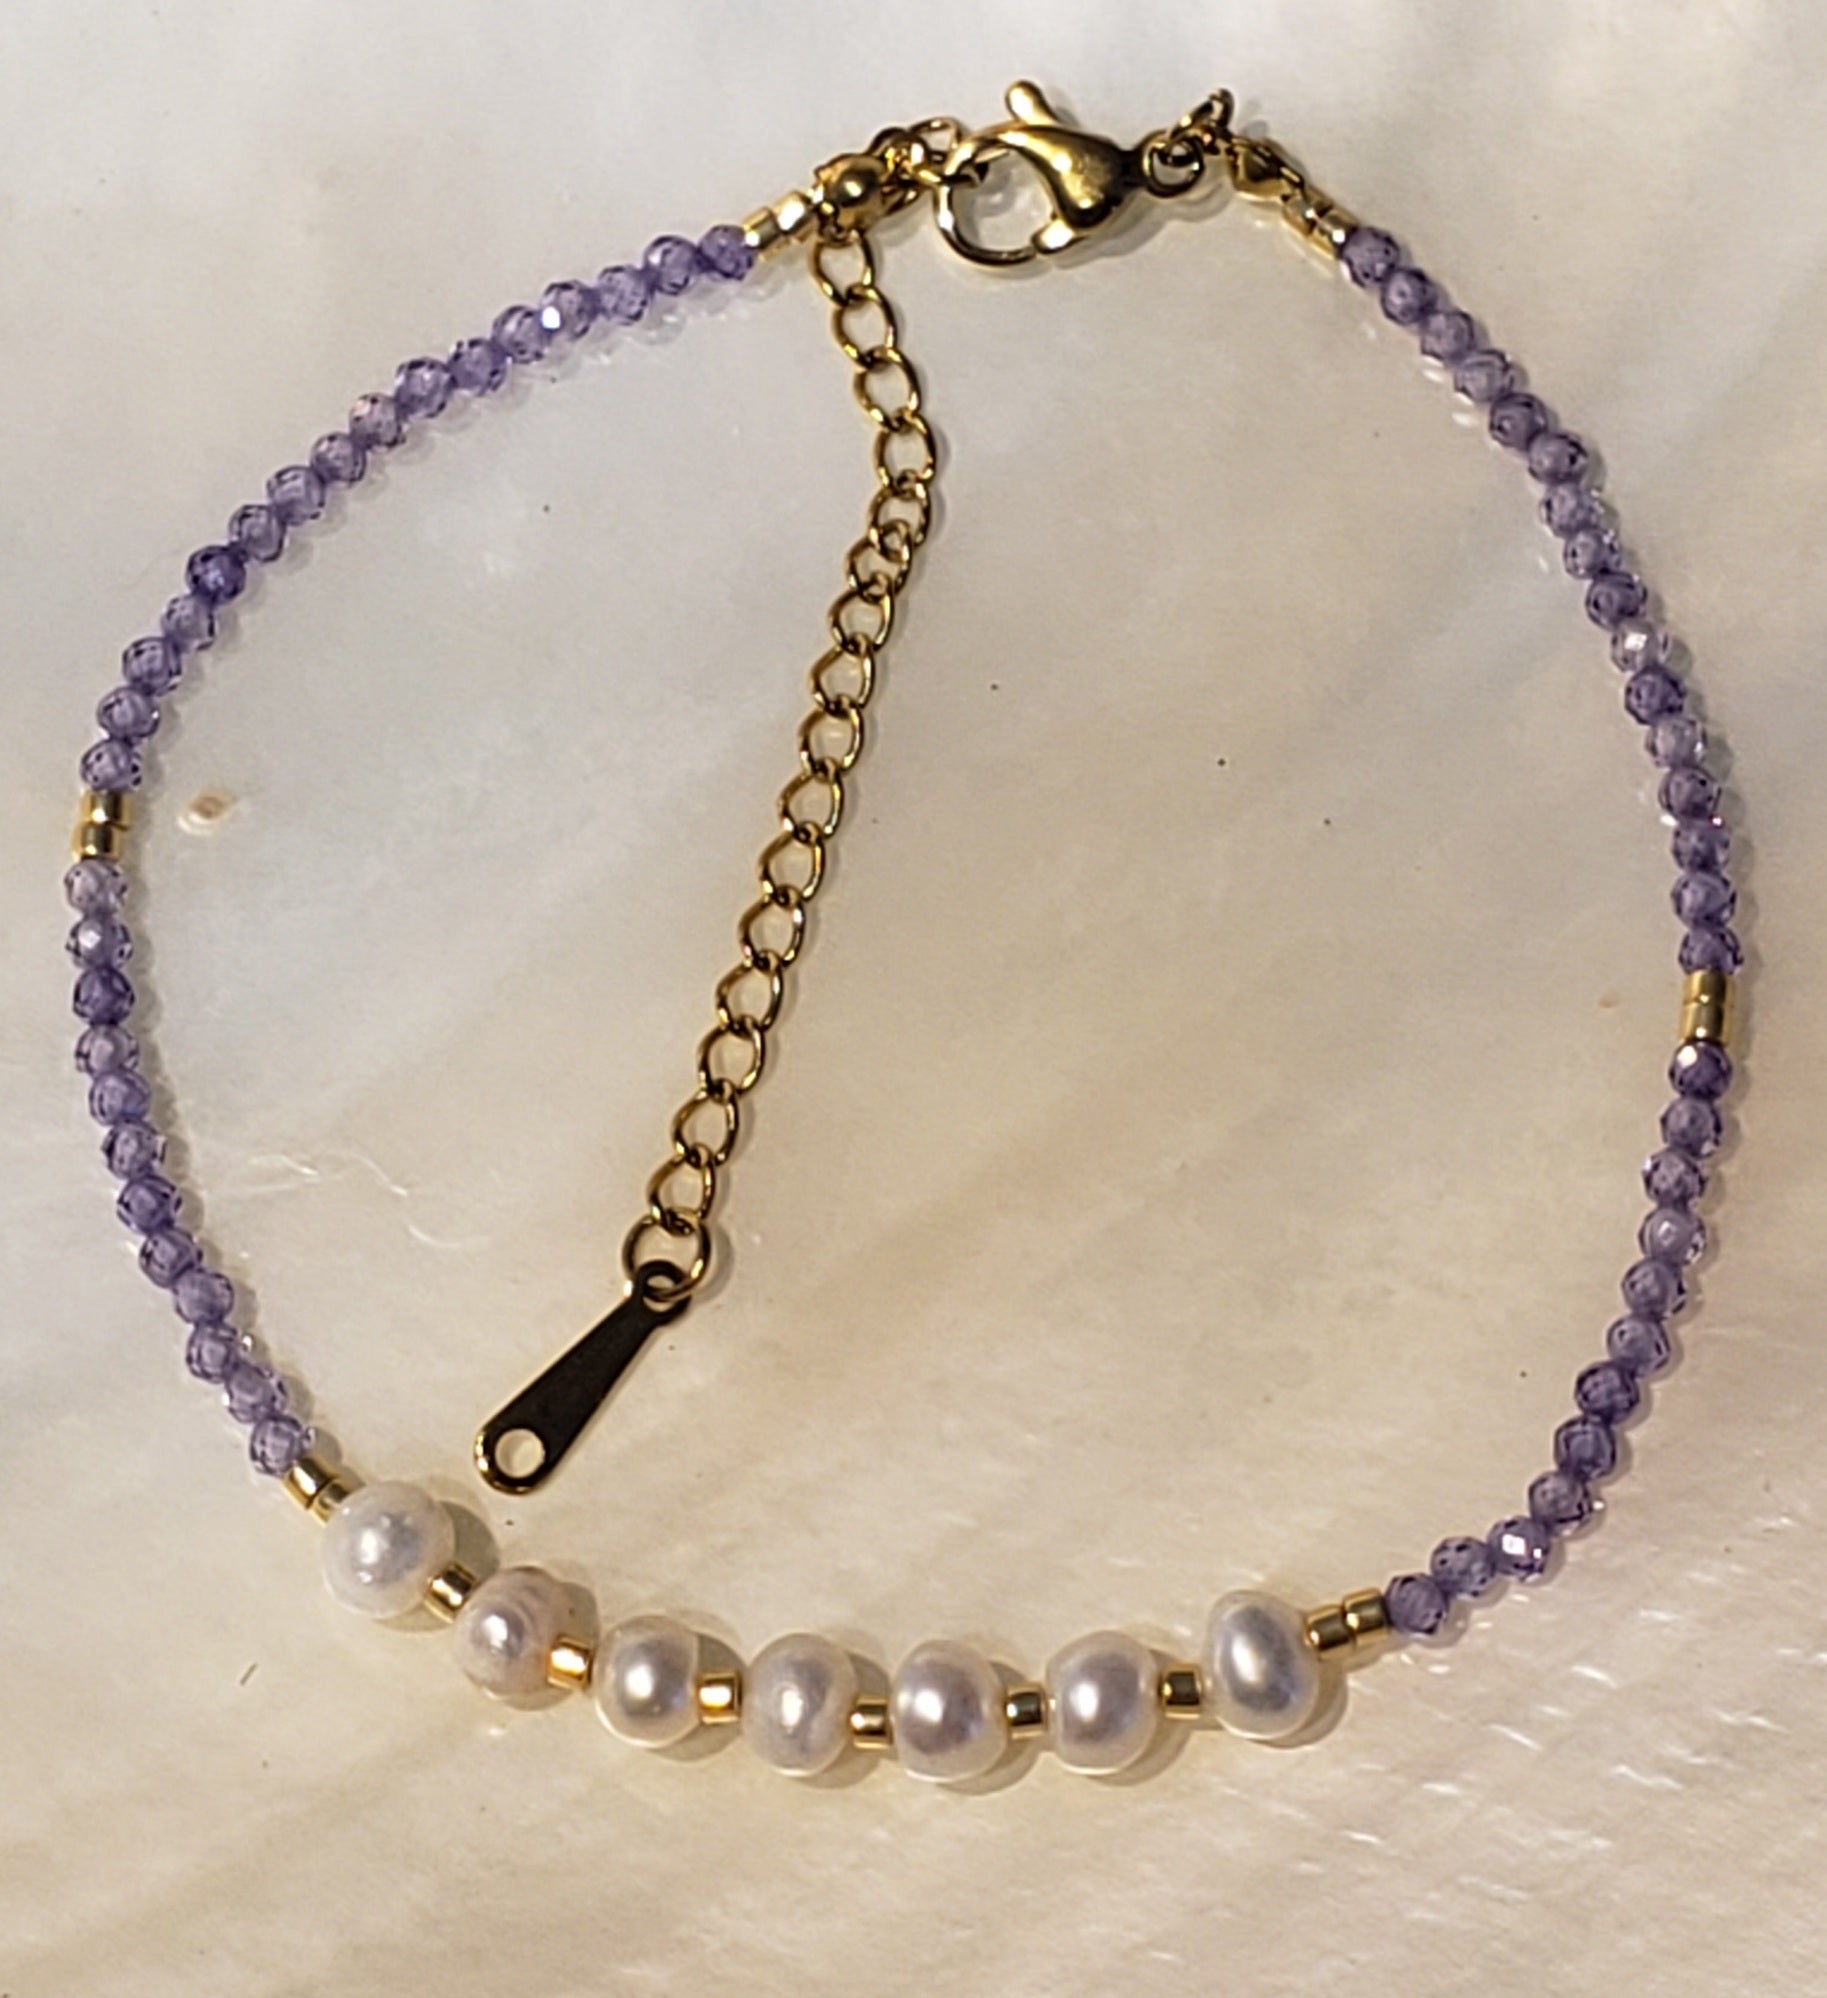 Bracelet Amethyst Gemstone and 7 Fresh Water Pearls Gold Filled